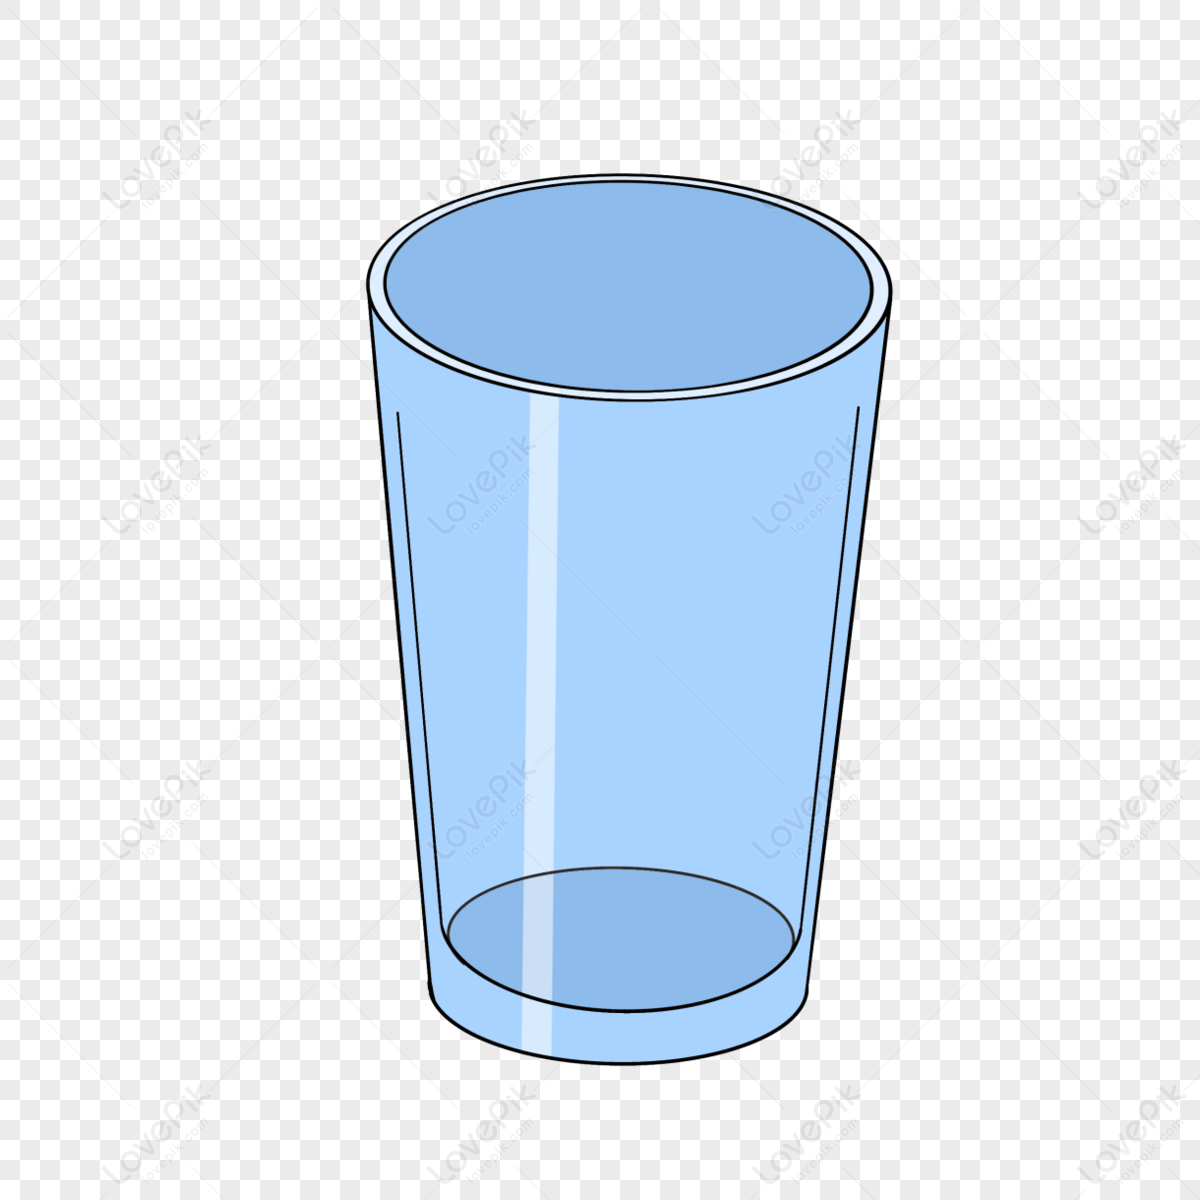 Lc - Little Curious Little Cup Transparent PNG - 530x398 - Free Download on  NicePNG